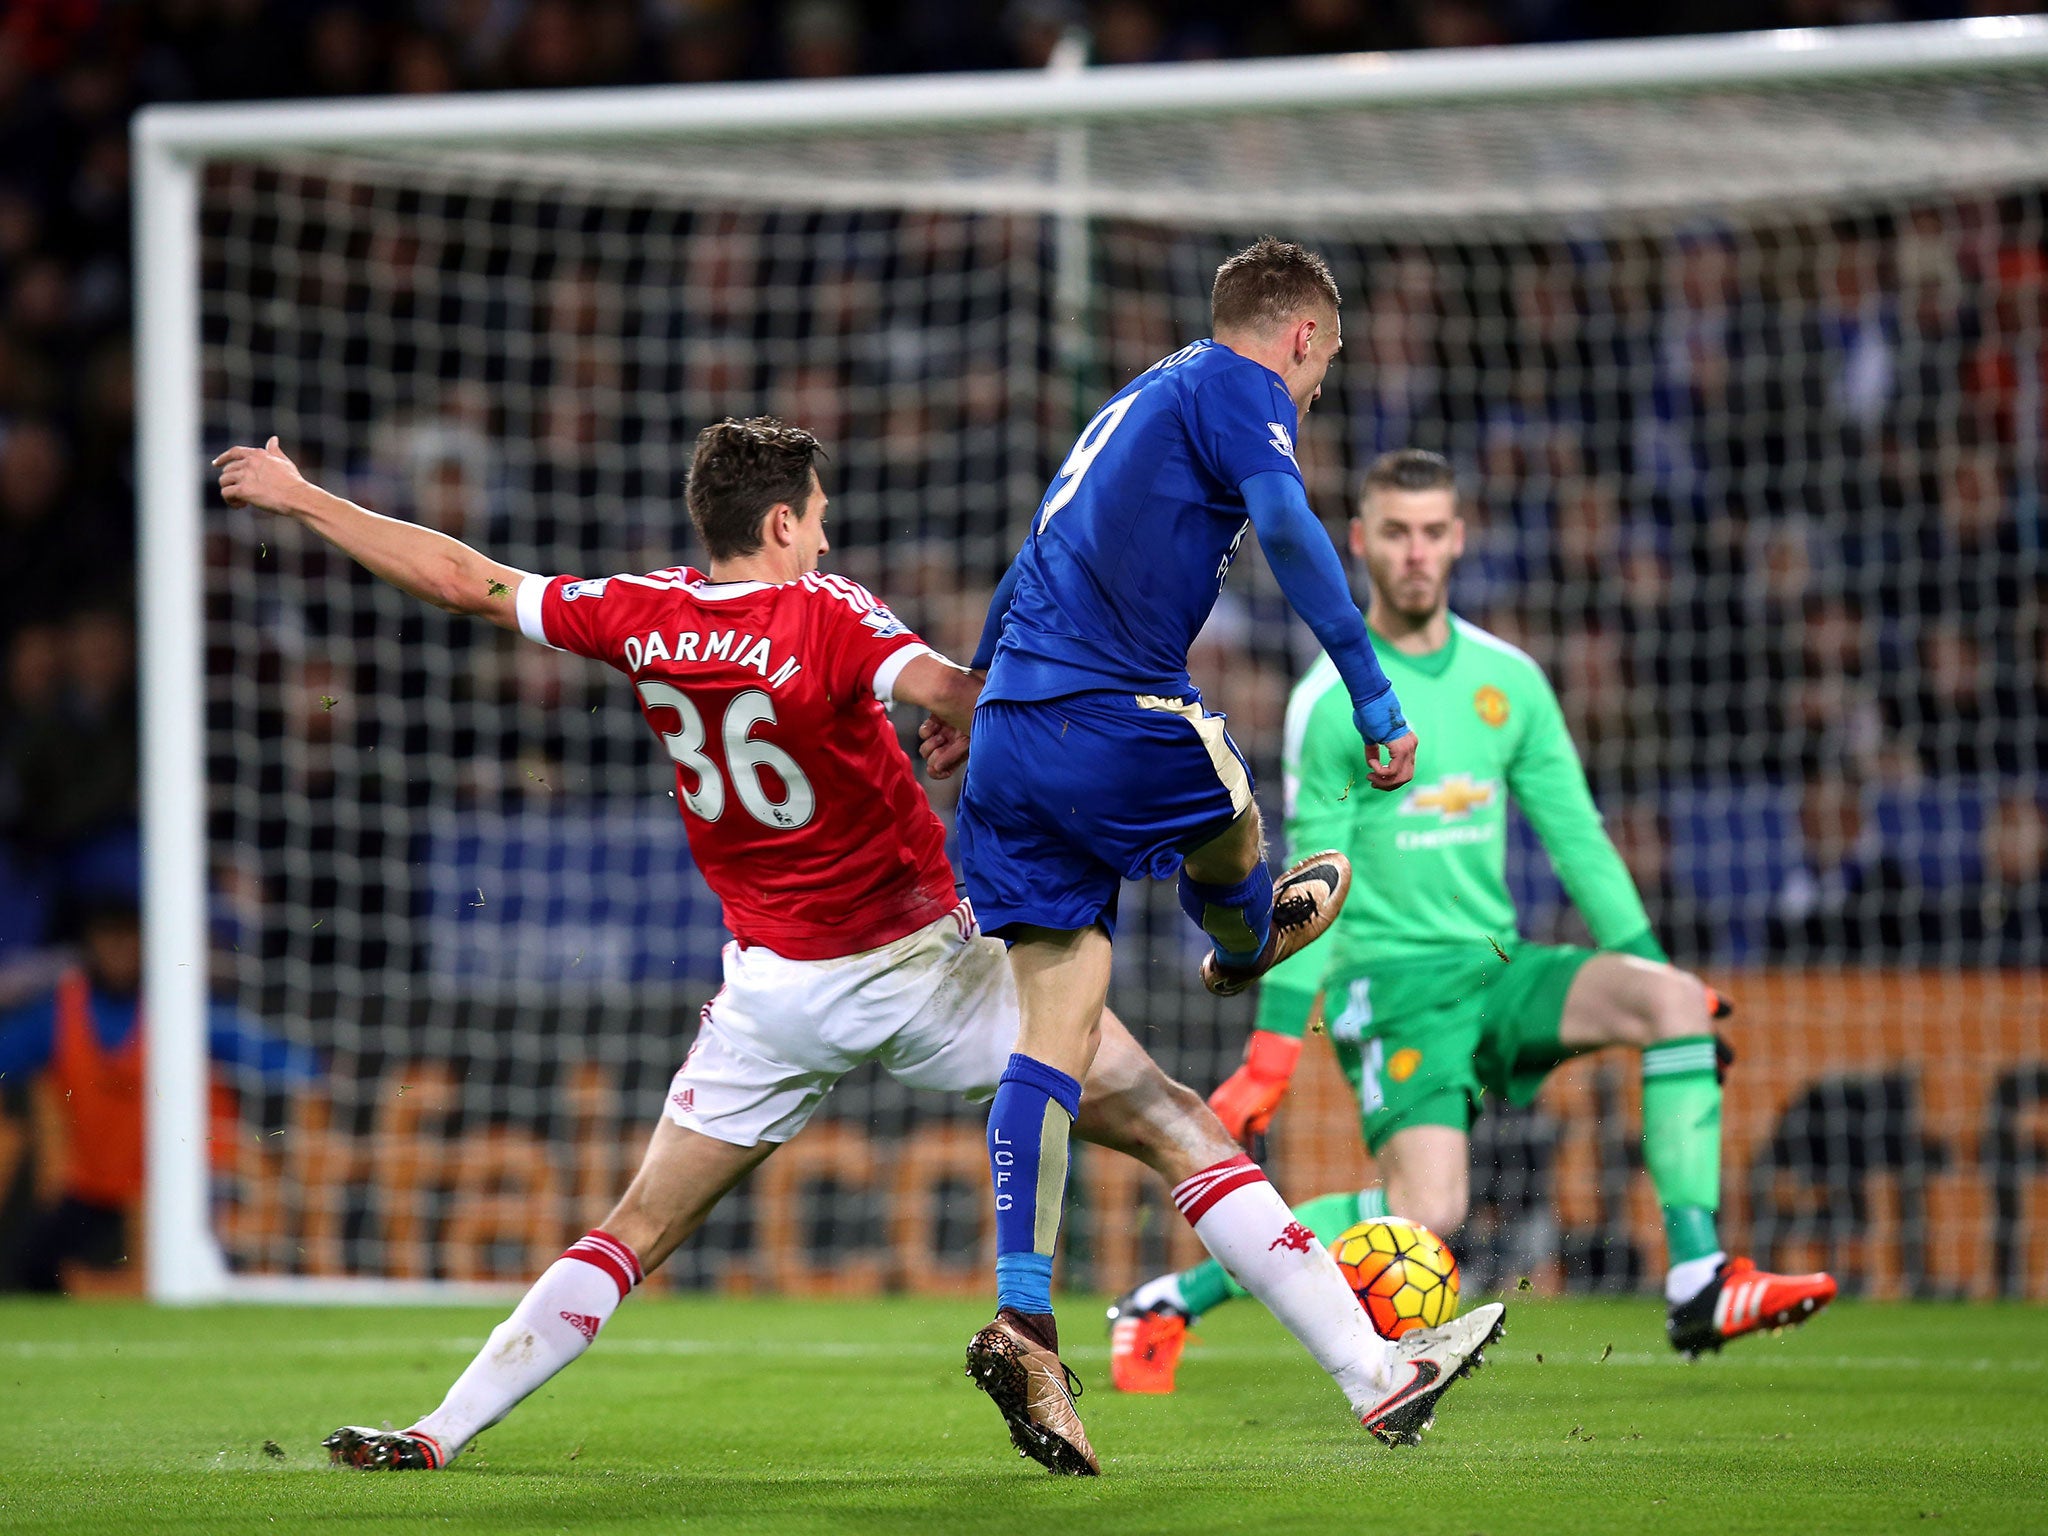 Jamie Vardy scores for Leicester against Manchester United